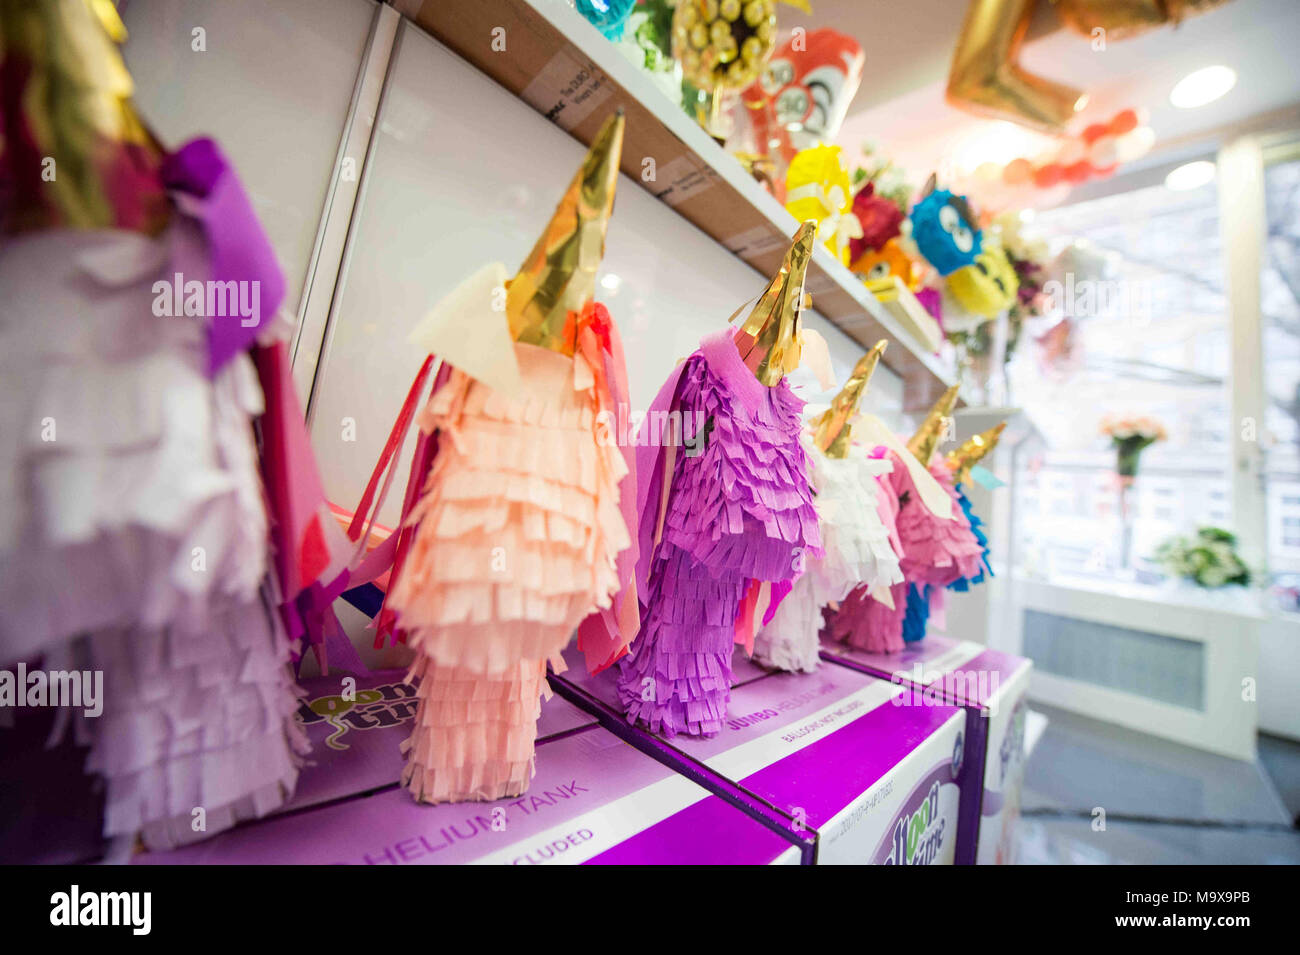 26 March 2018, Germany, Berlin: Pinatas on offer in a decoration shop.  Pinatas are papier mâché toy figures filled with candy and are  traditionally hung during children parties in Latin America and